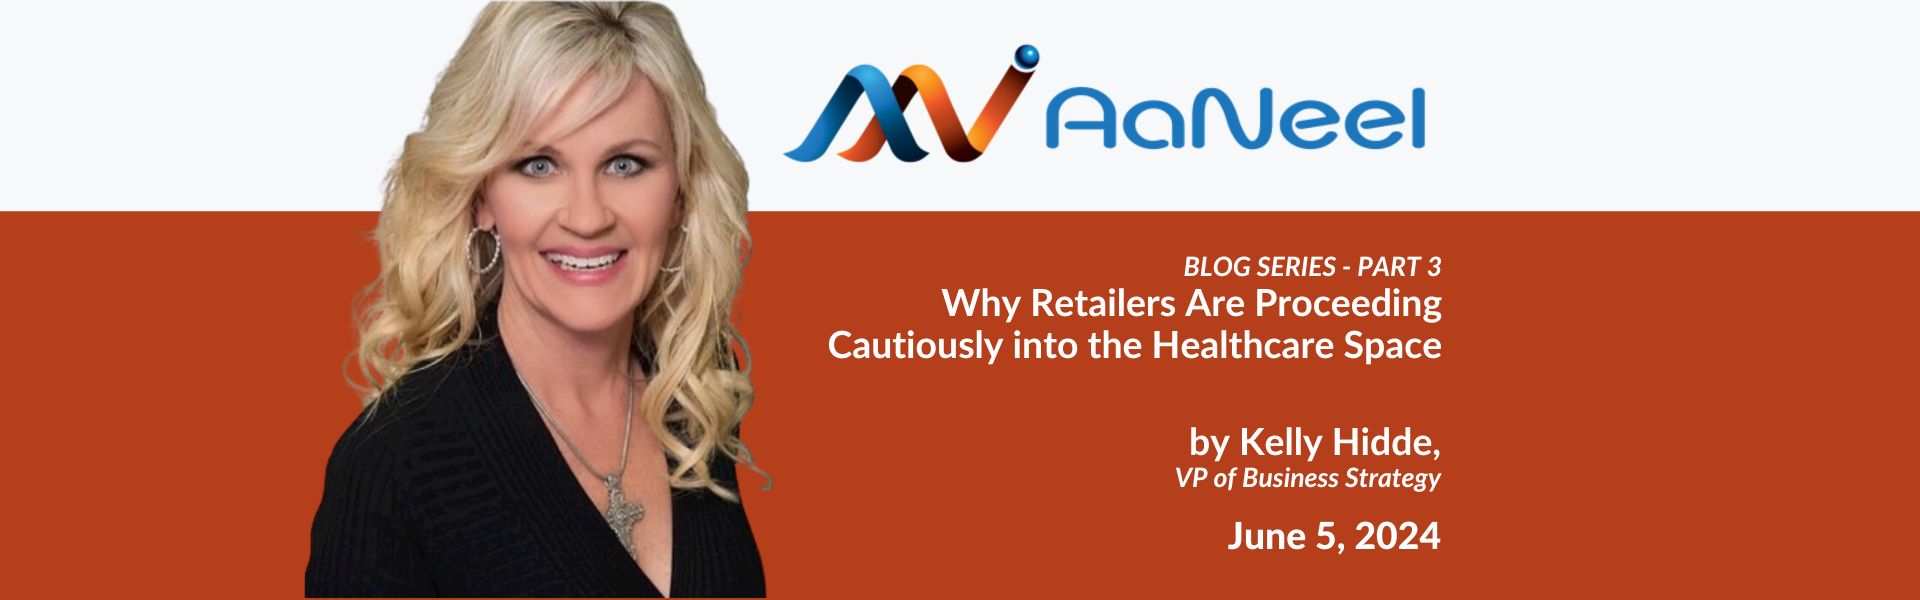 Why Retailers Are Proceeding Cautiously into the Healthcare Space